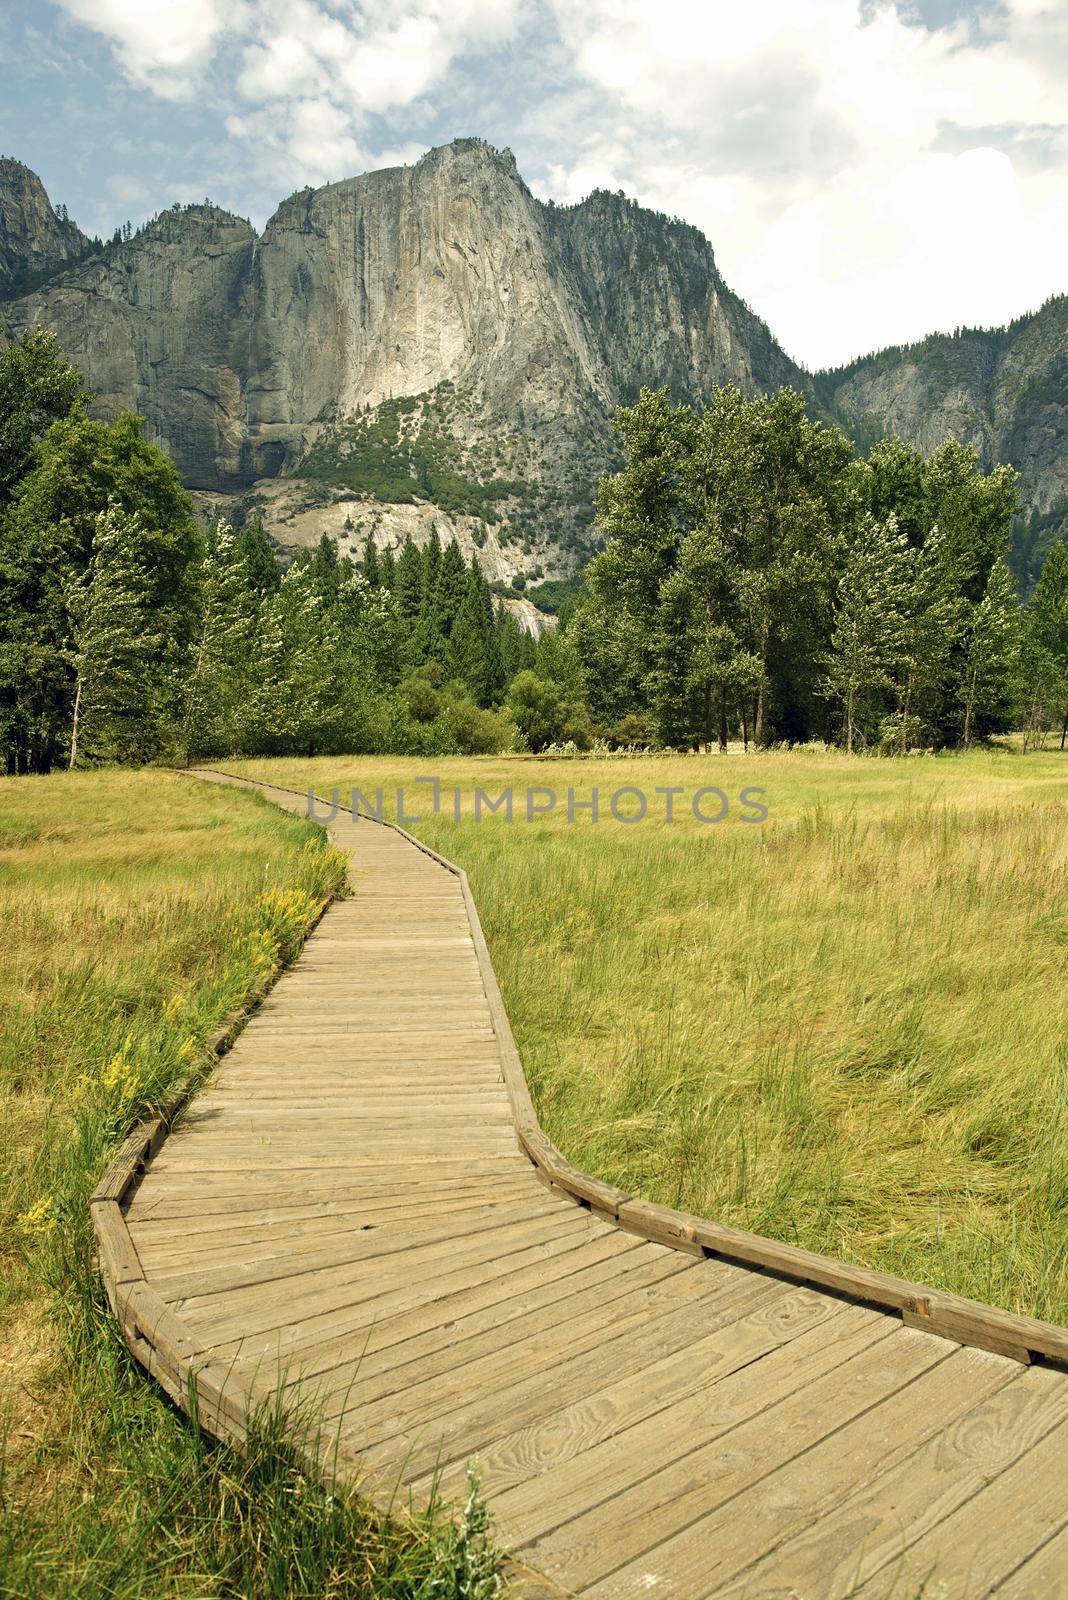 Wooden Pathway in Yosemite National Park, California, USA. Yosemite Landscape. by welcomia